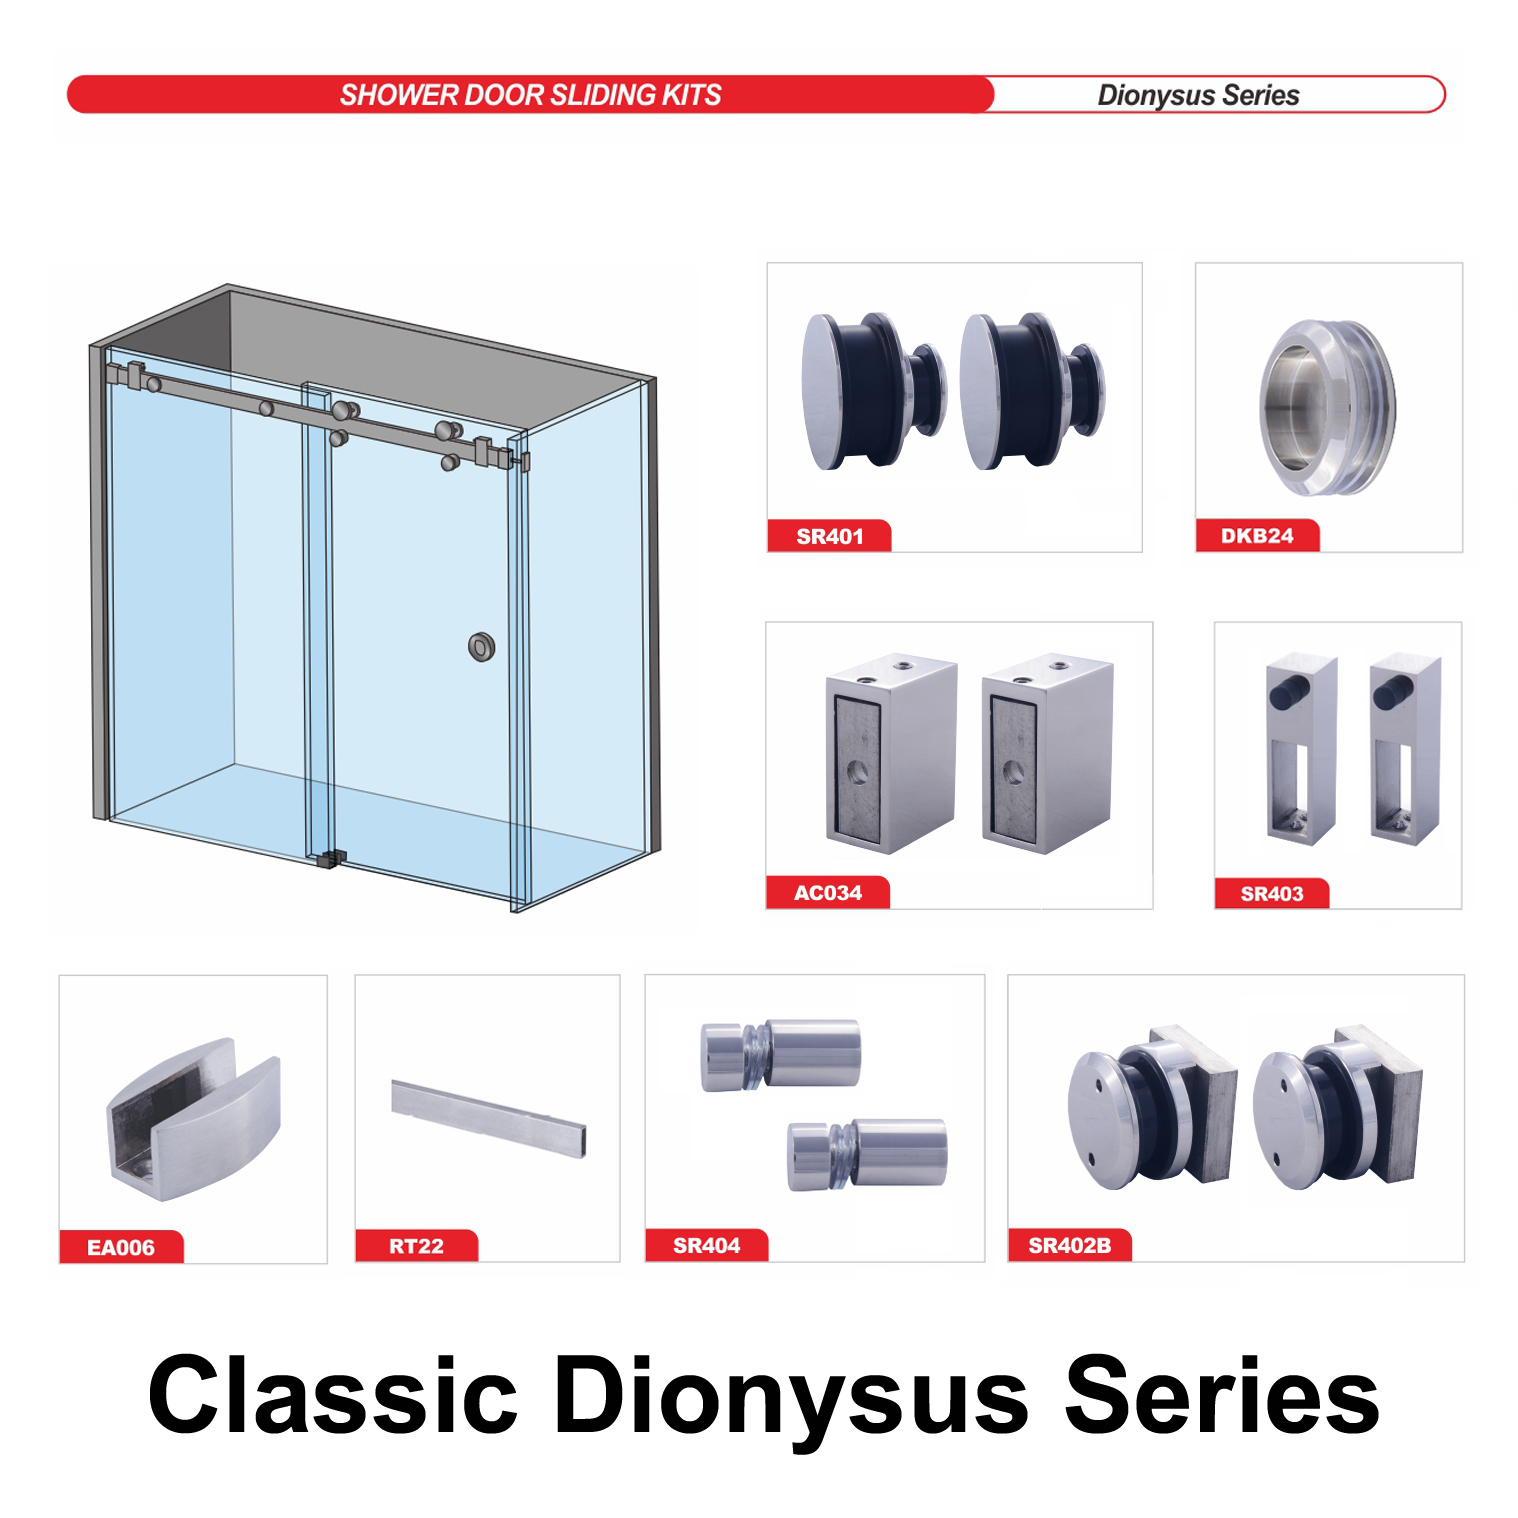 WALKER Stainless Steel Deluxe 180 Degree Classic Dionysus Series Sliding System